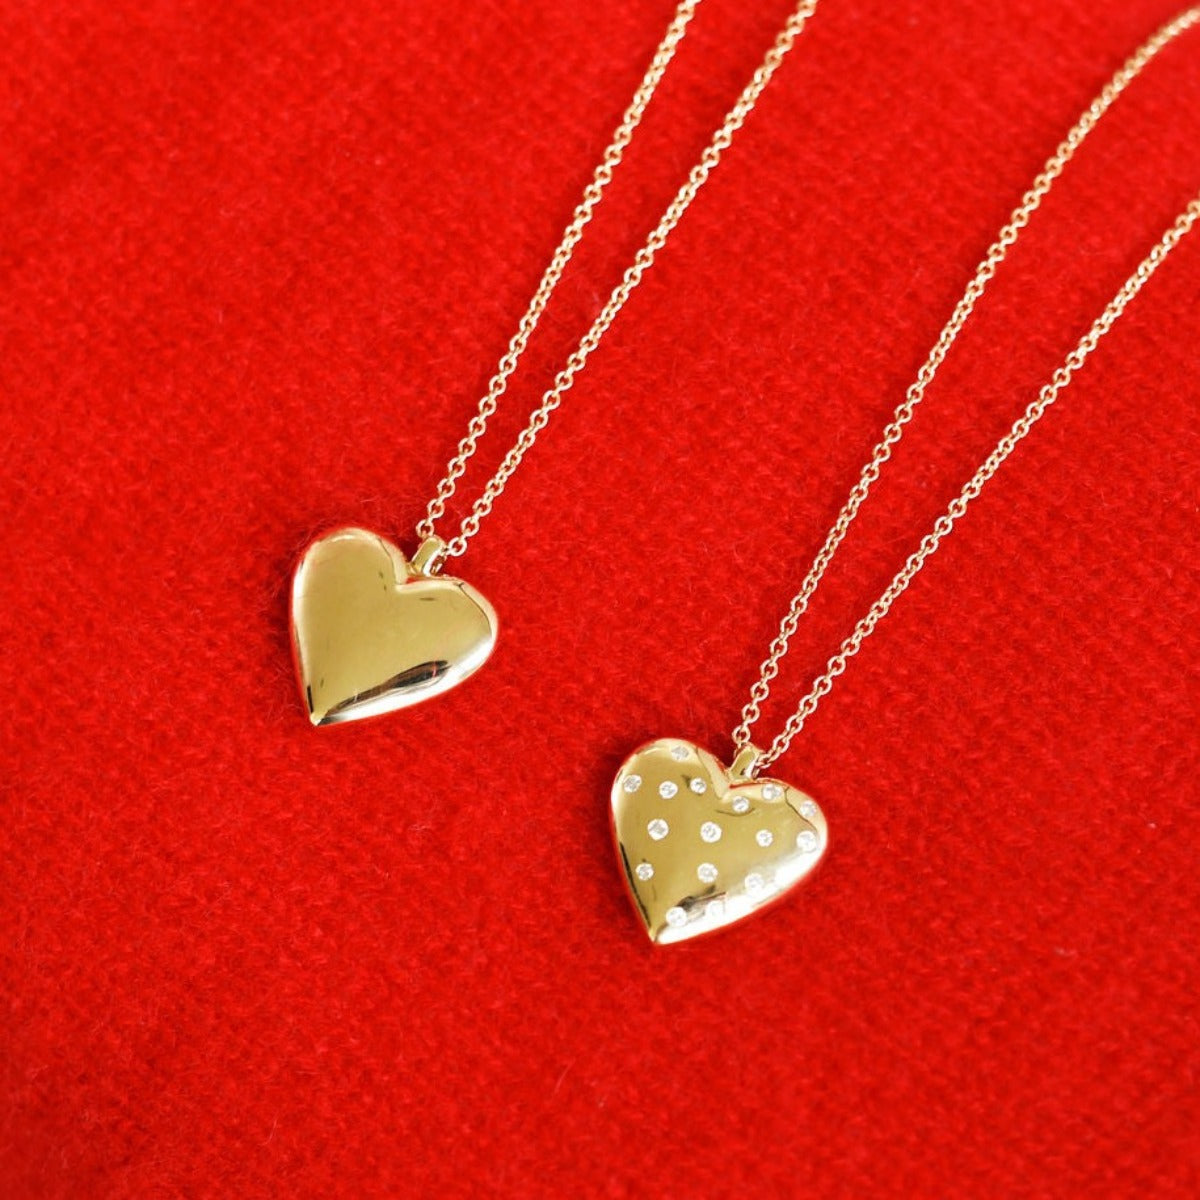 Amazon.com: 14k Real Gold Heart Necklace for Women | Puff Heart Necklaces  in 14k Gold | Puffed Heart Pendant Necklace | Delicate Love Jewelry | Gifts  for Birthday, 18